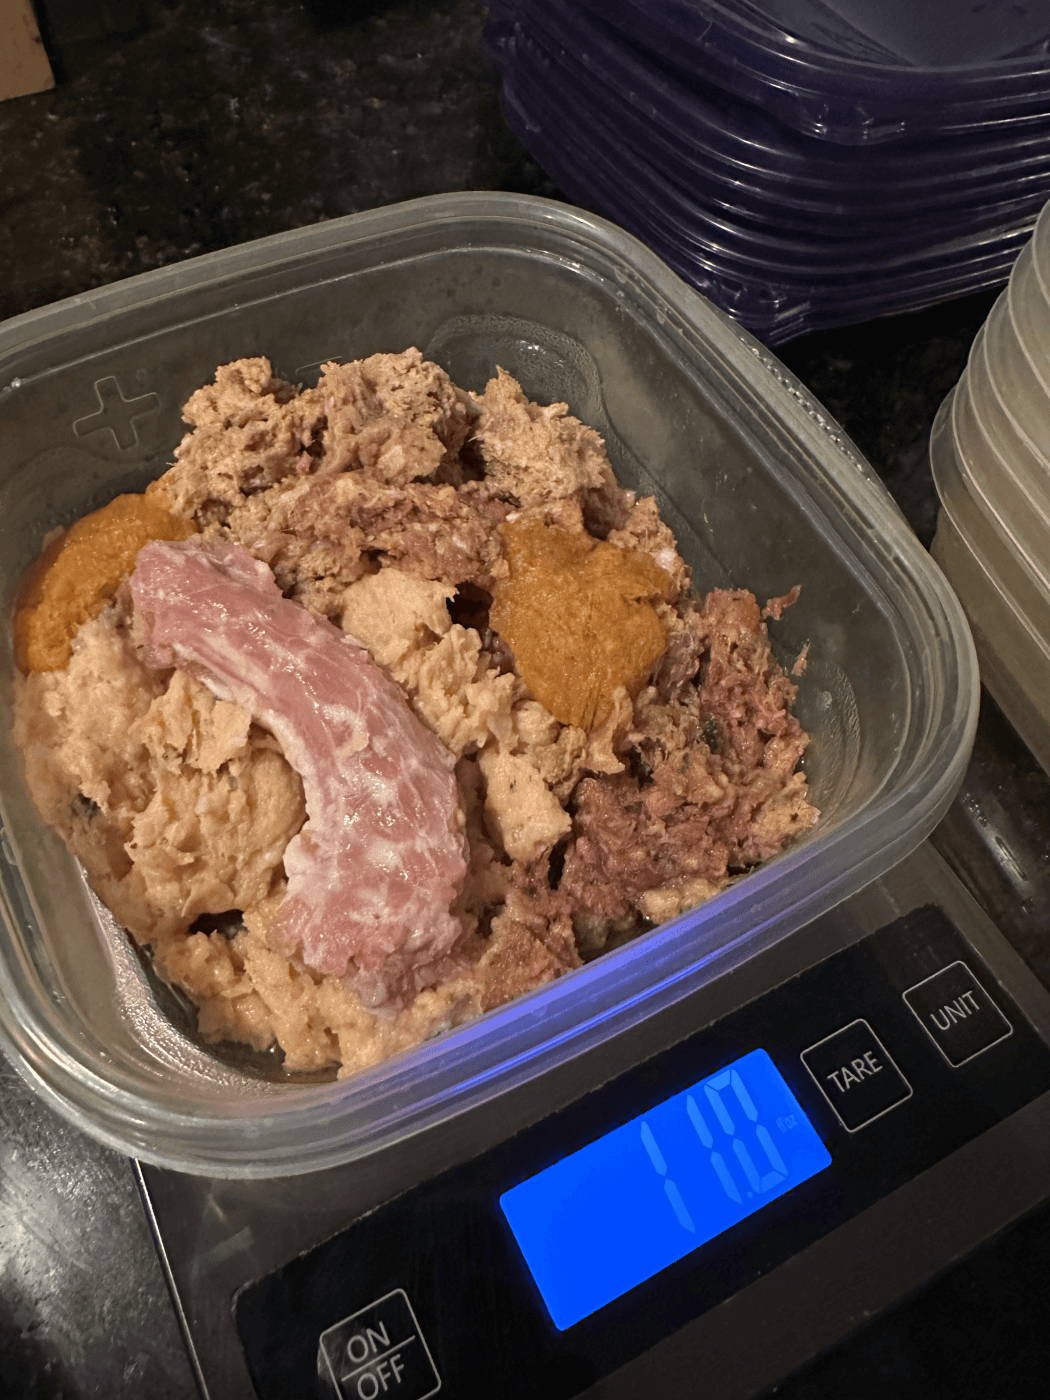 Raw meat in Tupperware container on kitchen scale.